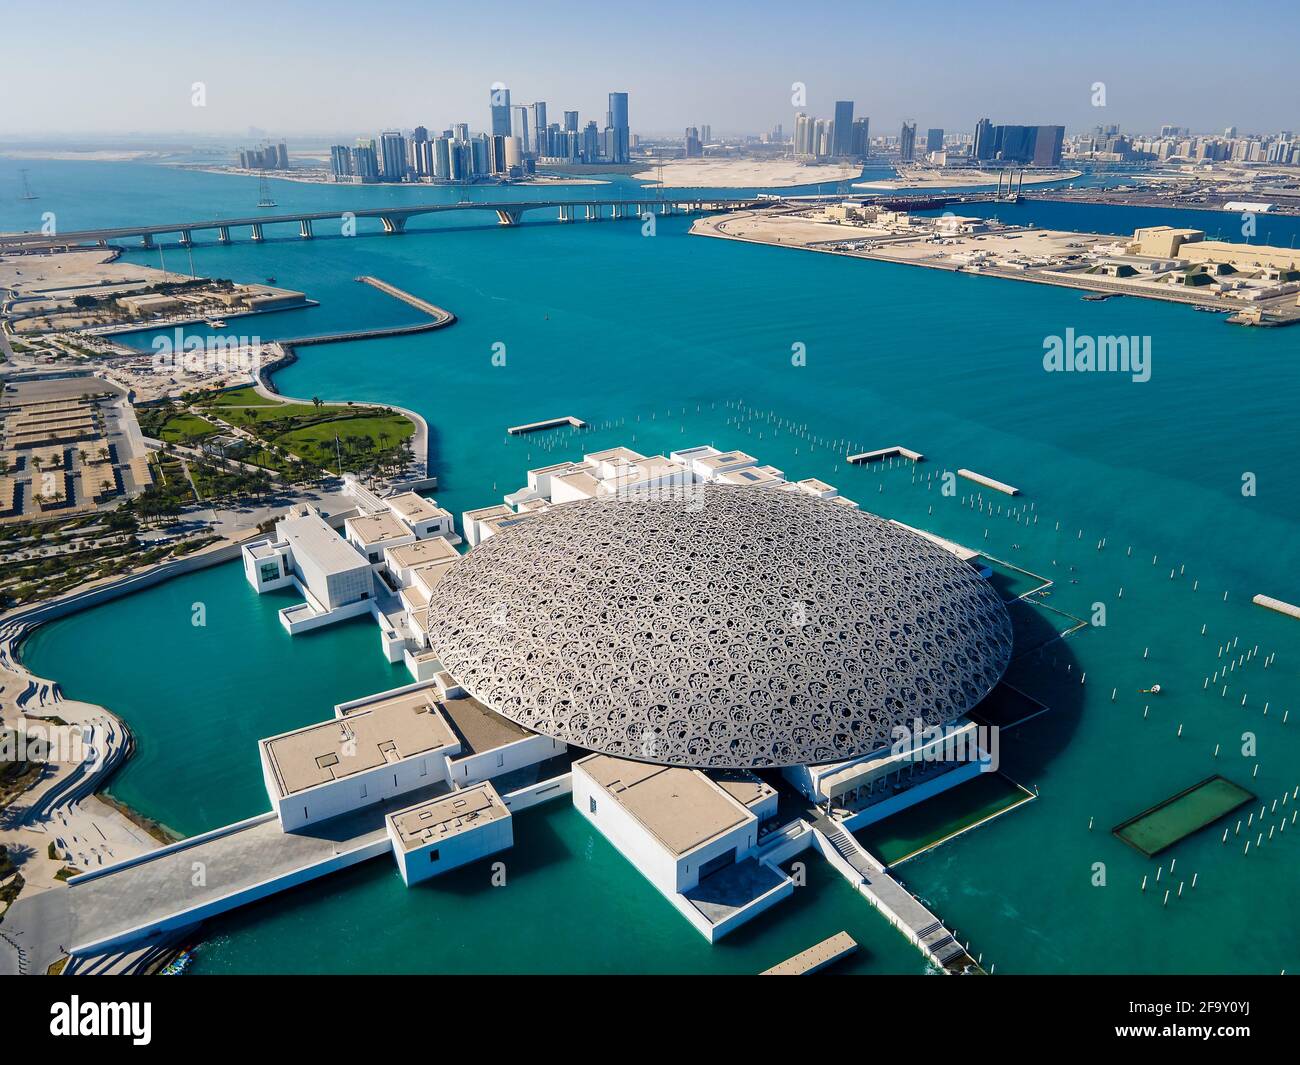 Abu Dhabi, United Arab Emirates - April 6, 2021: Louvre museum and Abu Dhabi aerial cityscape rising from the seaside water at the United Arab Emirate Stock Photo